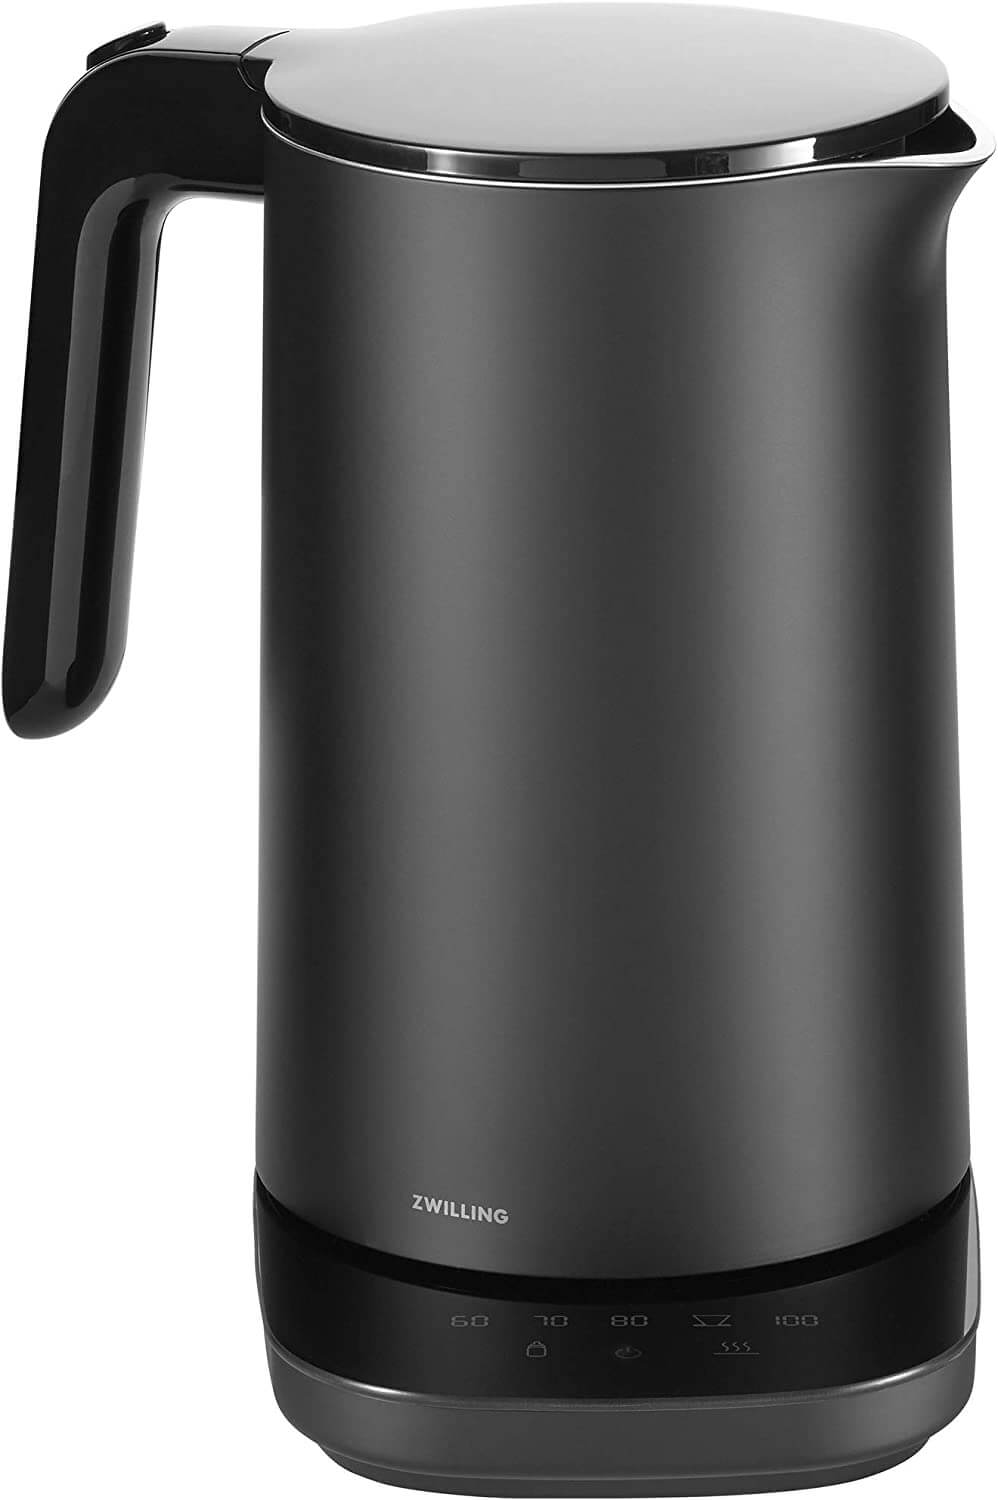 blackl electric tea kettle with handle and white lid